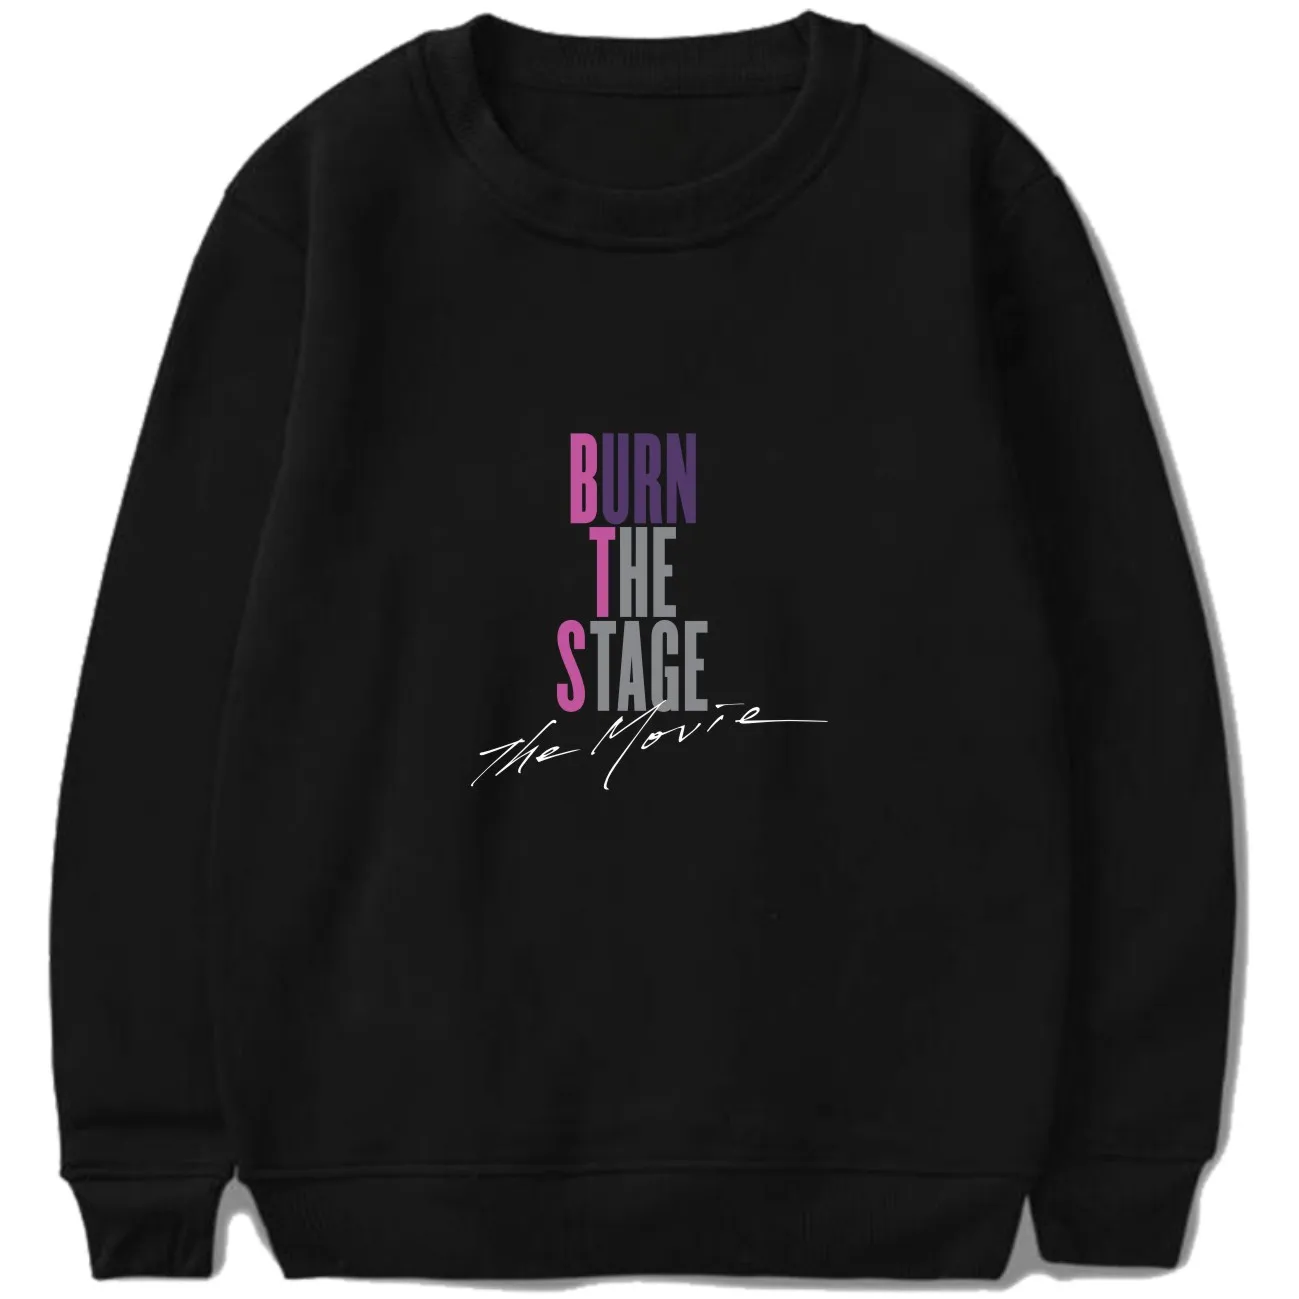 Drop Ship 2018 Autumn Winter BTS Kpop Hoodies Sweatshirts Letters Printed Clothes BURN THE STAGE THE MOVIE Pullover Tops Moletom